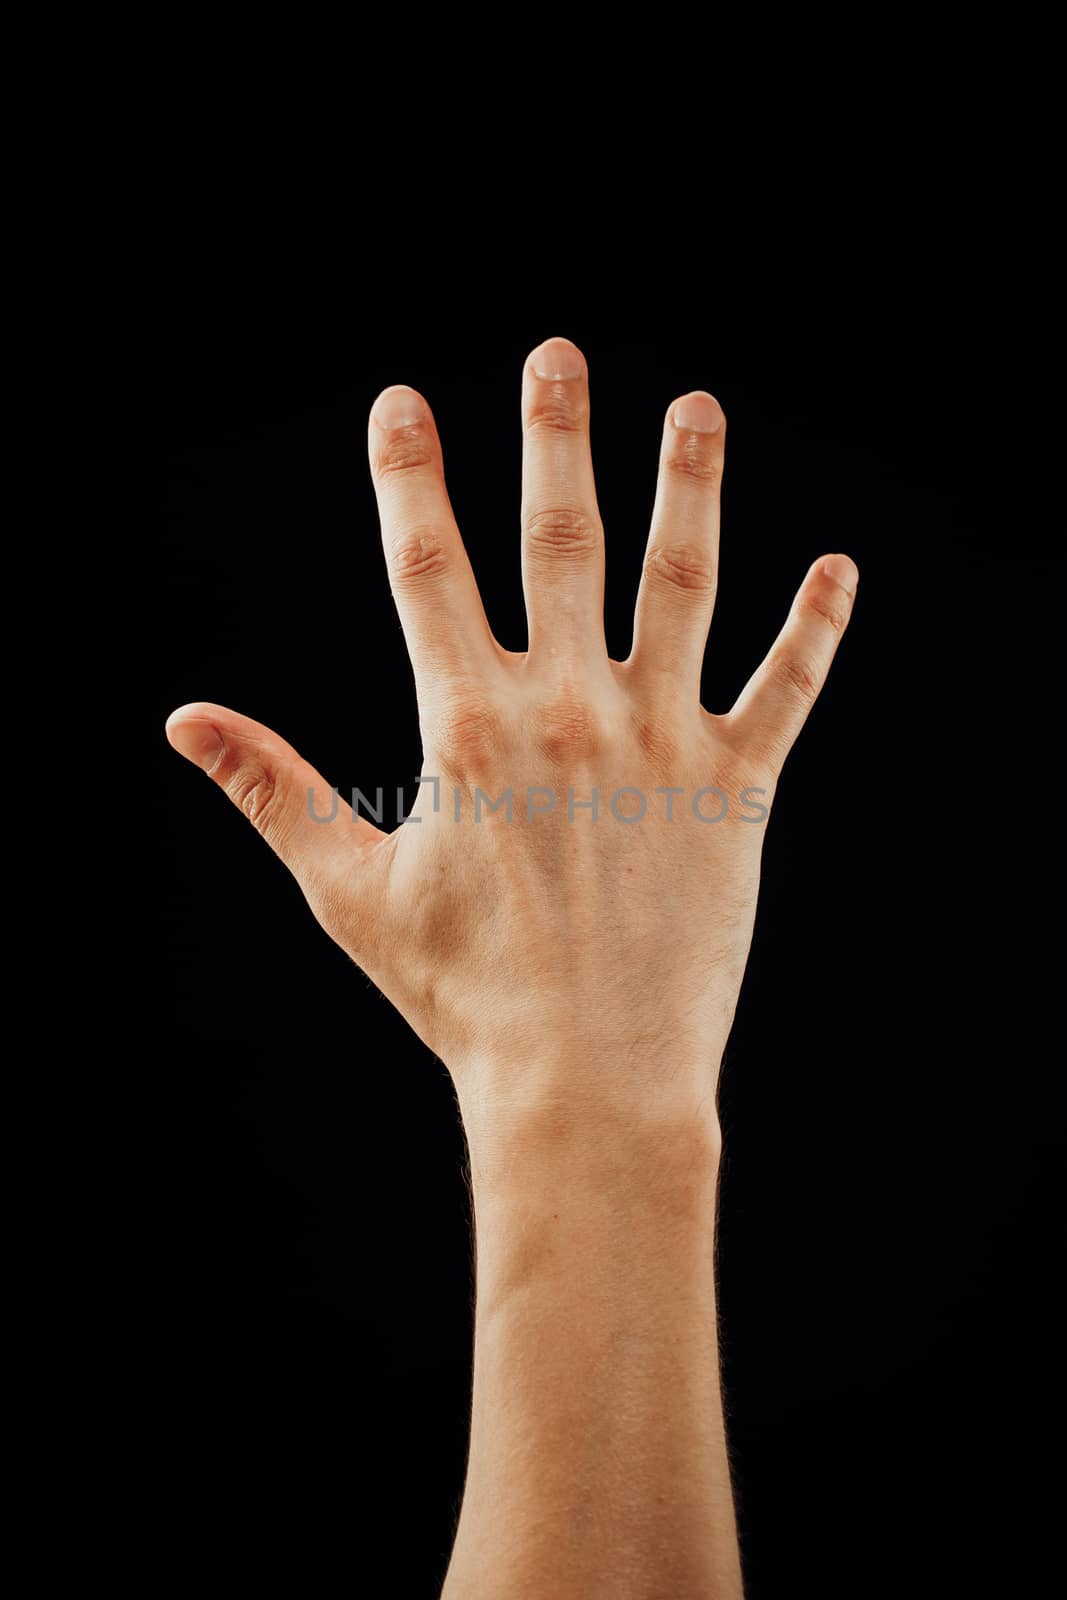 male hand, isolated on black